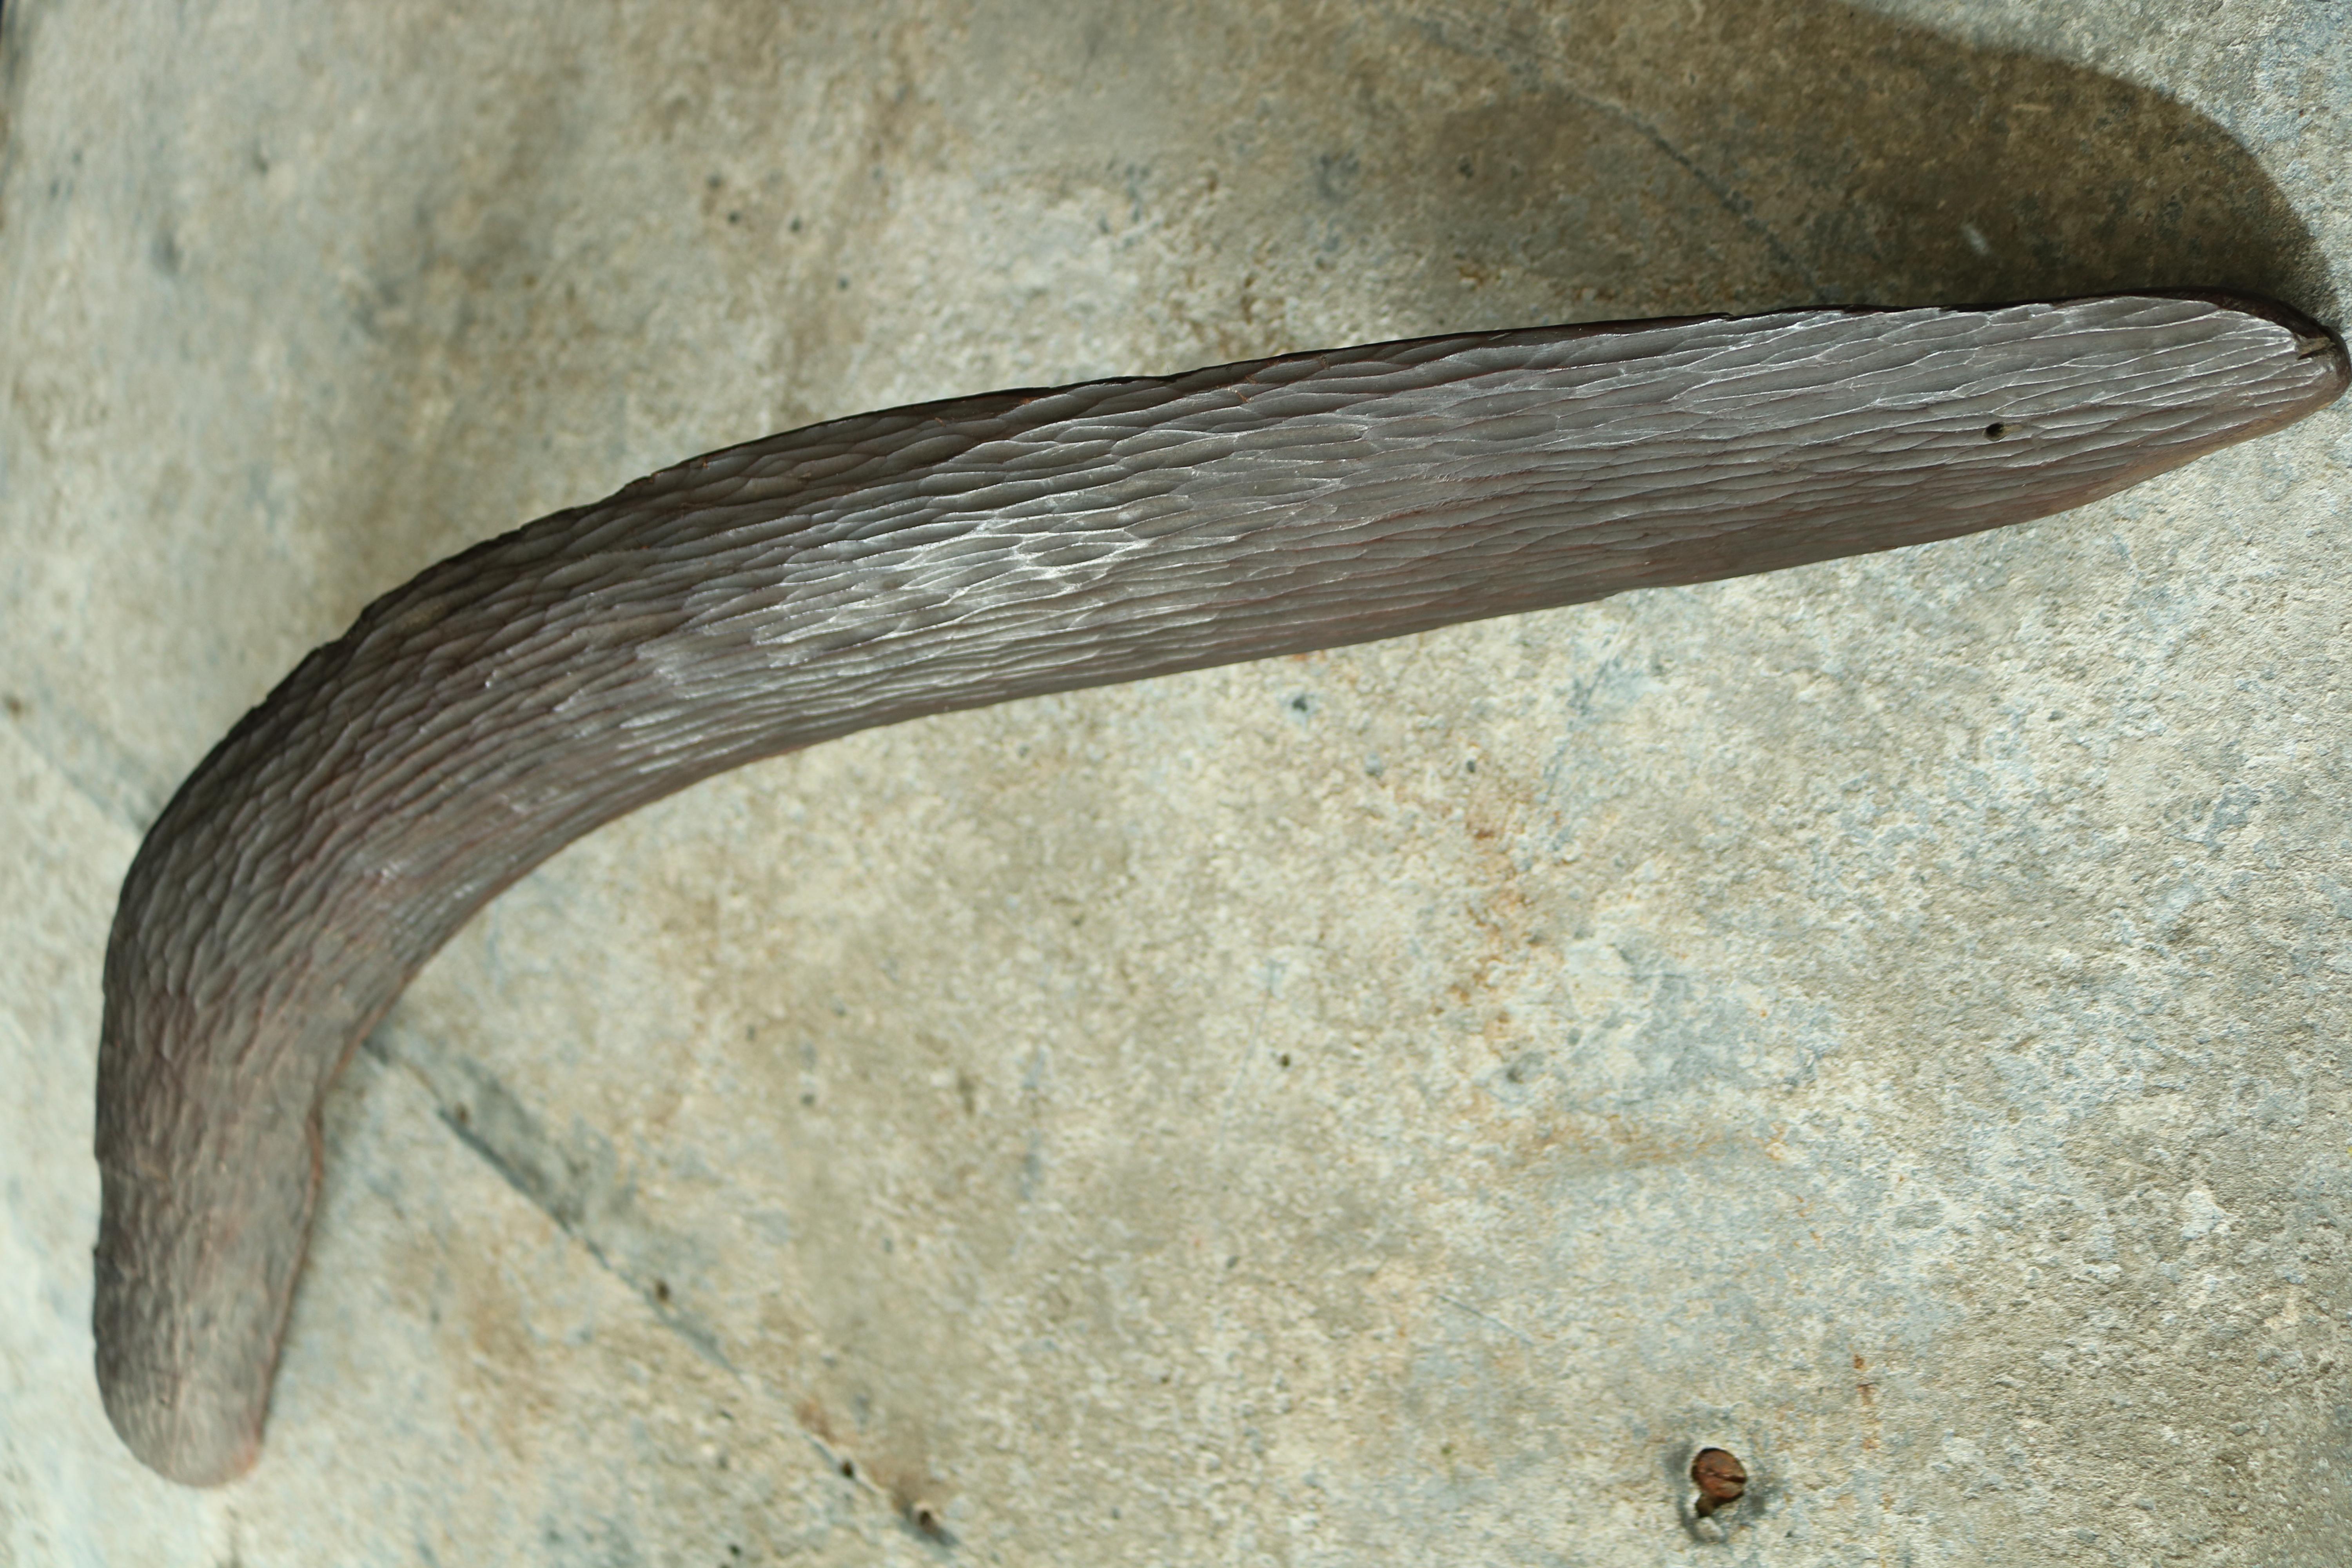 A good mid-19th century Oceania Australian aboriginal hunting boomerang, fine stone carved hard wood with the initials carved “L.R.” in excellent original condition.
 